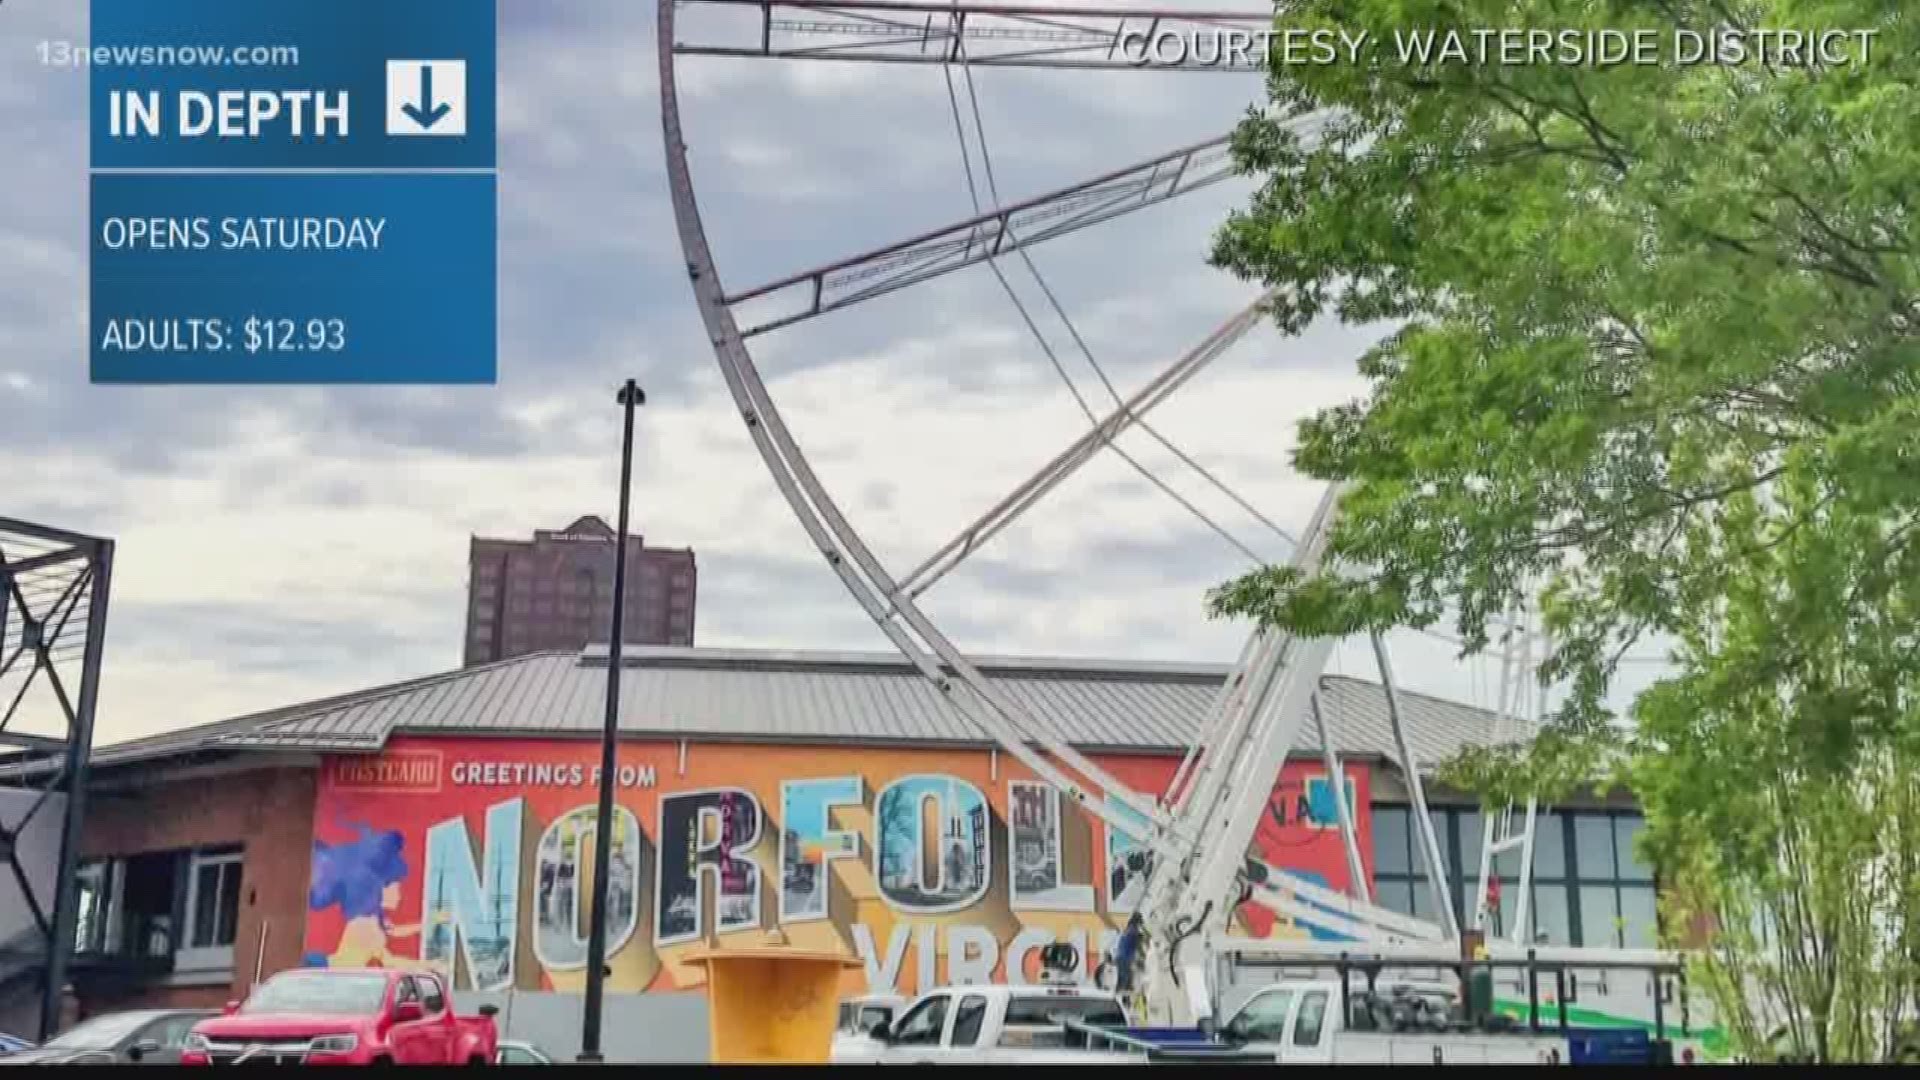 Starting Saturday you can get a birds-eye view of downtown Norfolk from the new SkyStar Ferris Wheel at Waterside District.